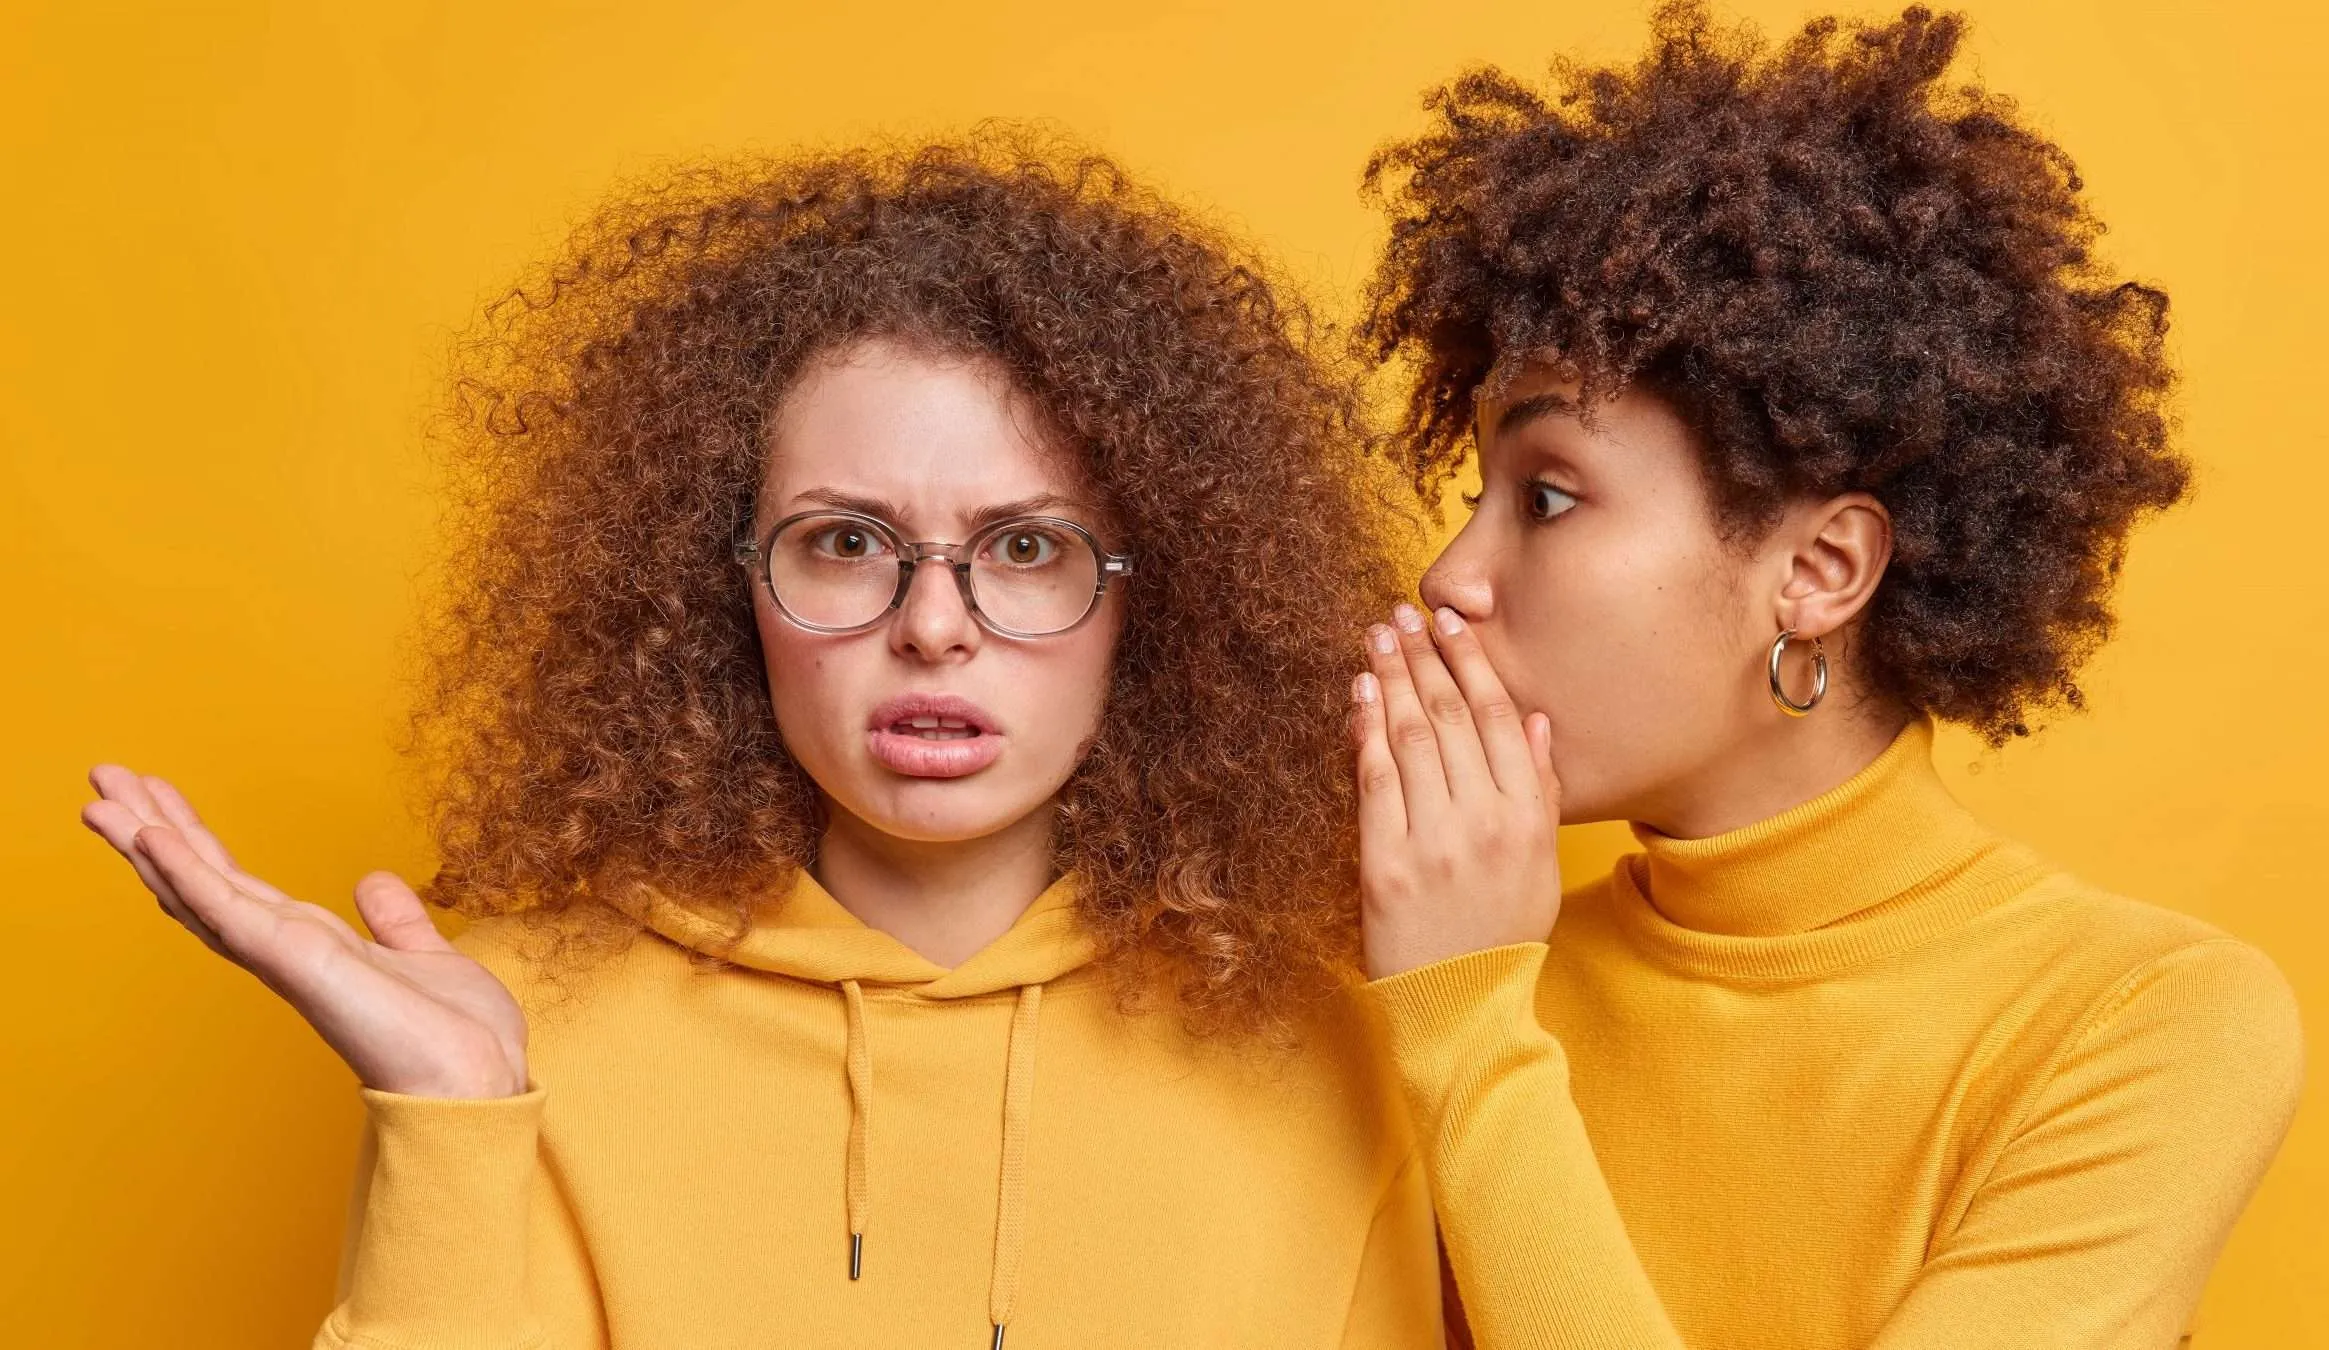 Girl wearing a yellow turtleneck sweater whispering to another girl